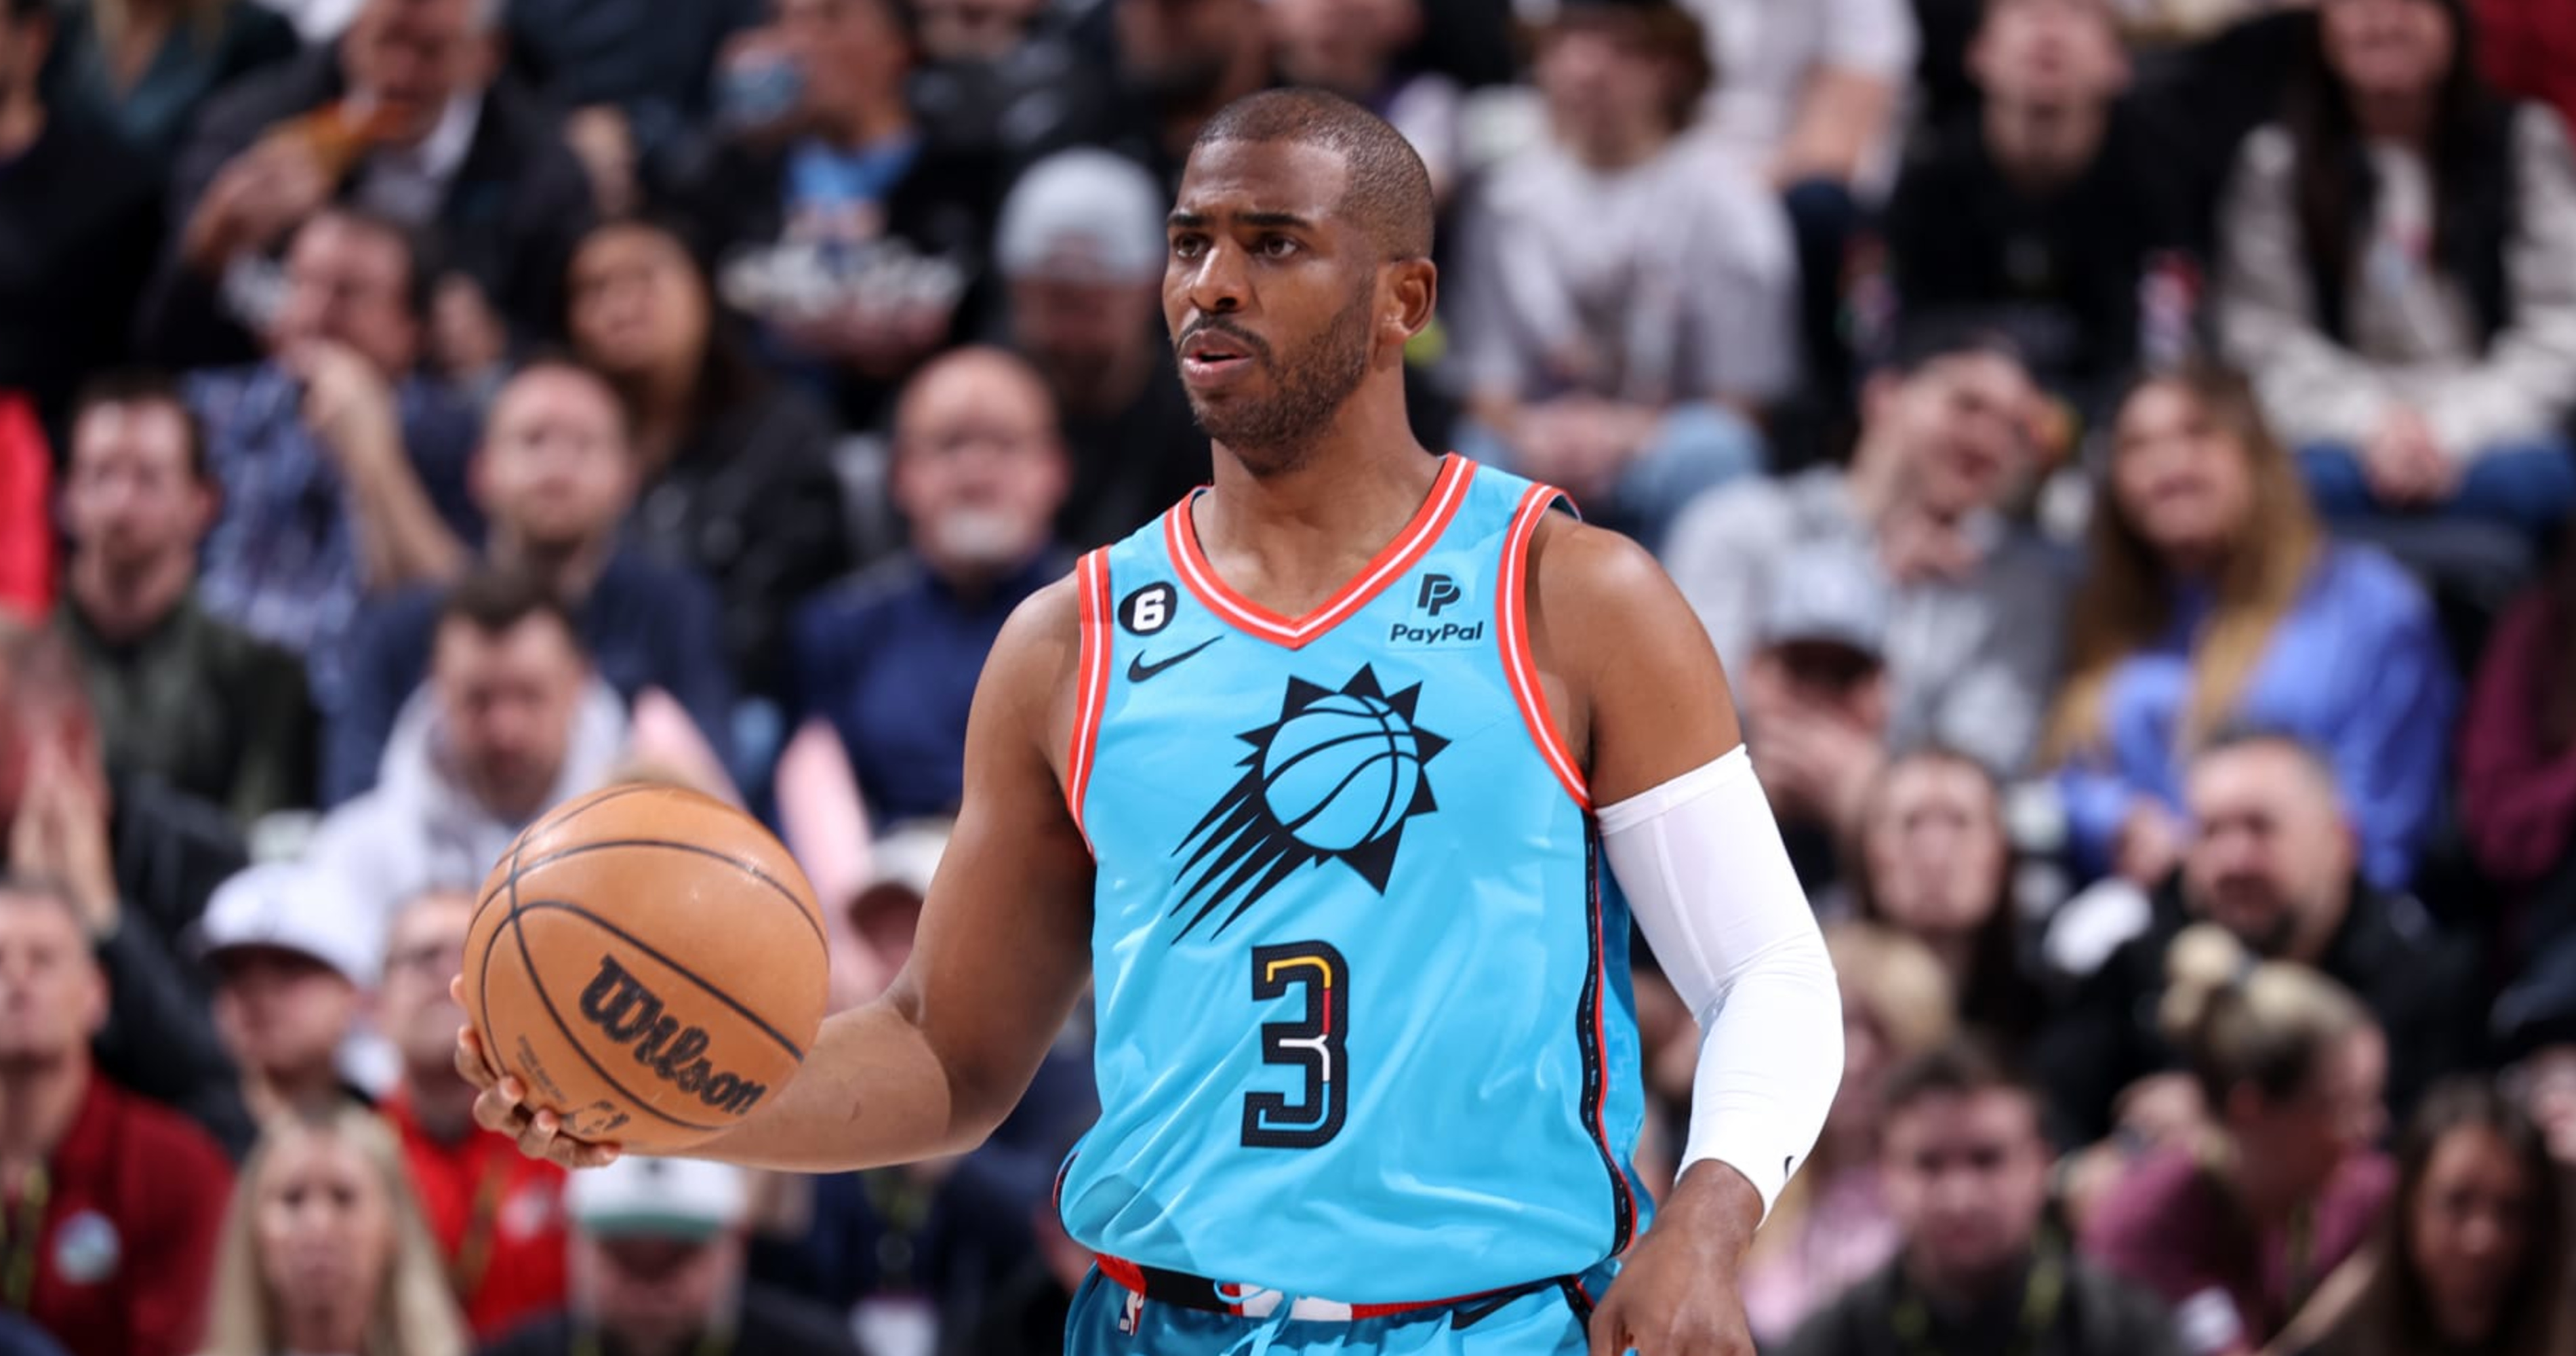 Chris Paul's future after Rockets is murky - The Dream Shake